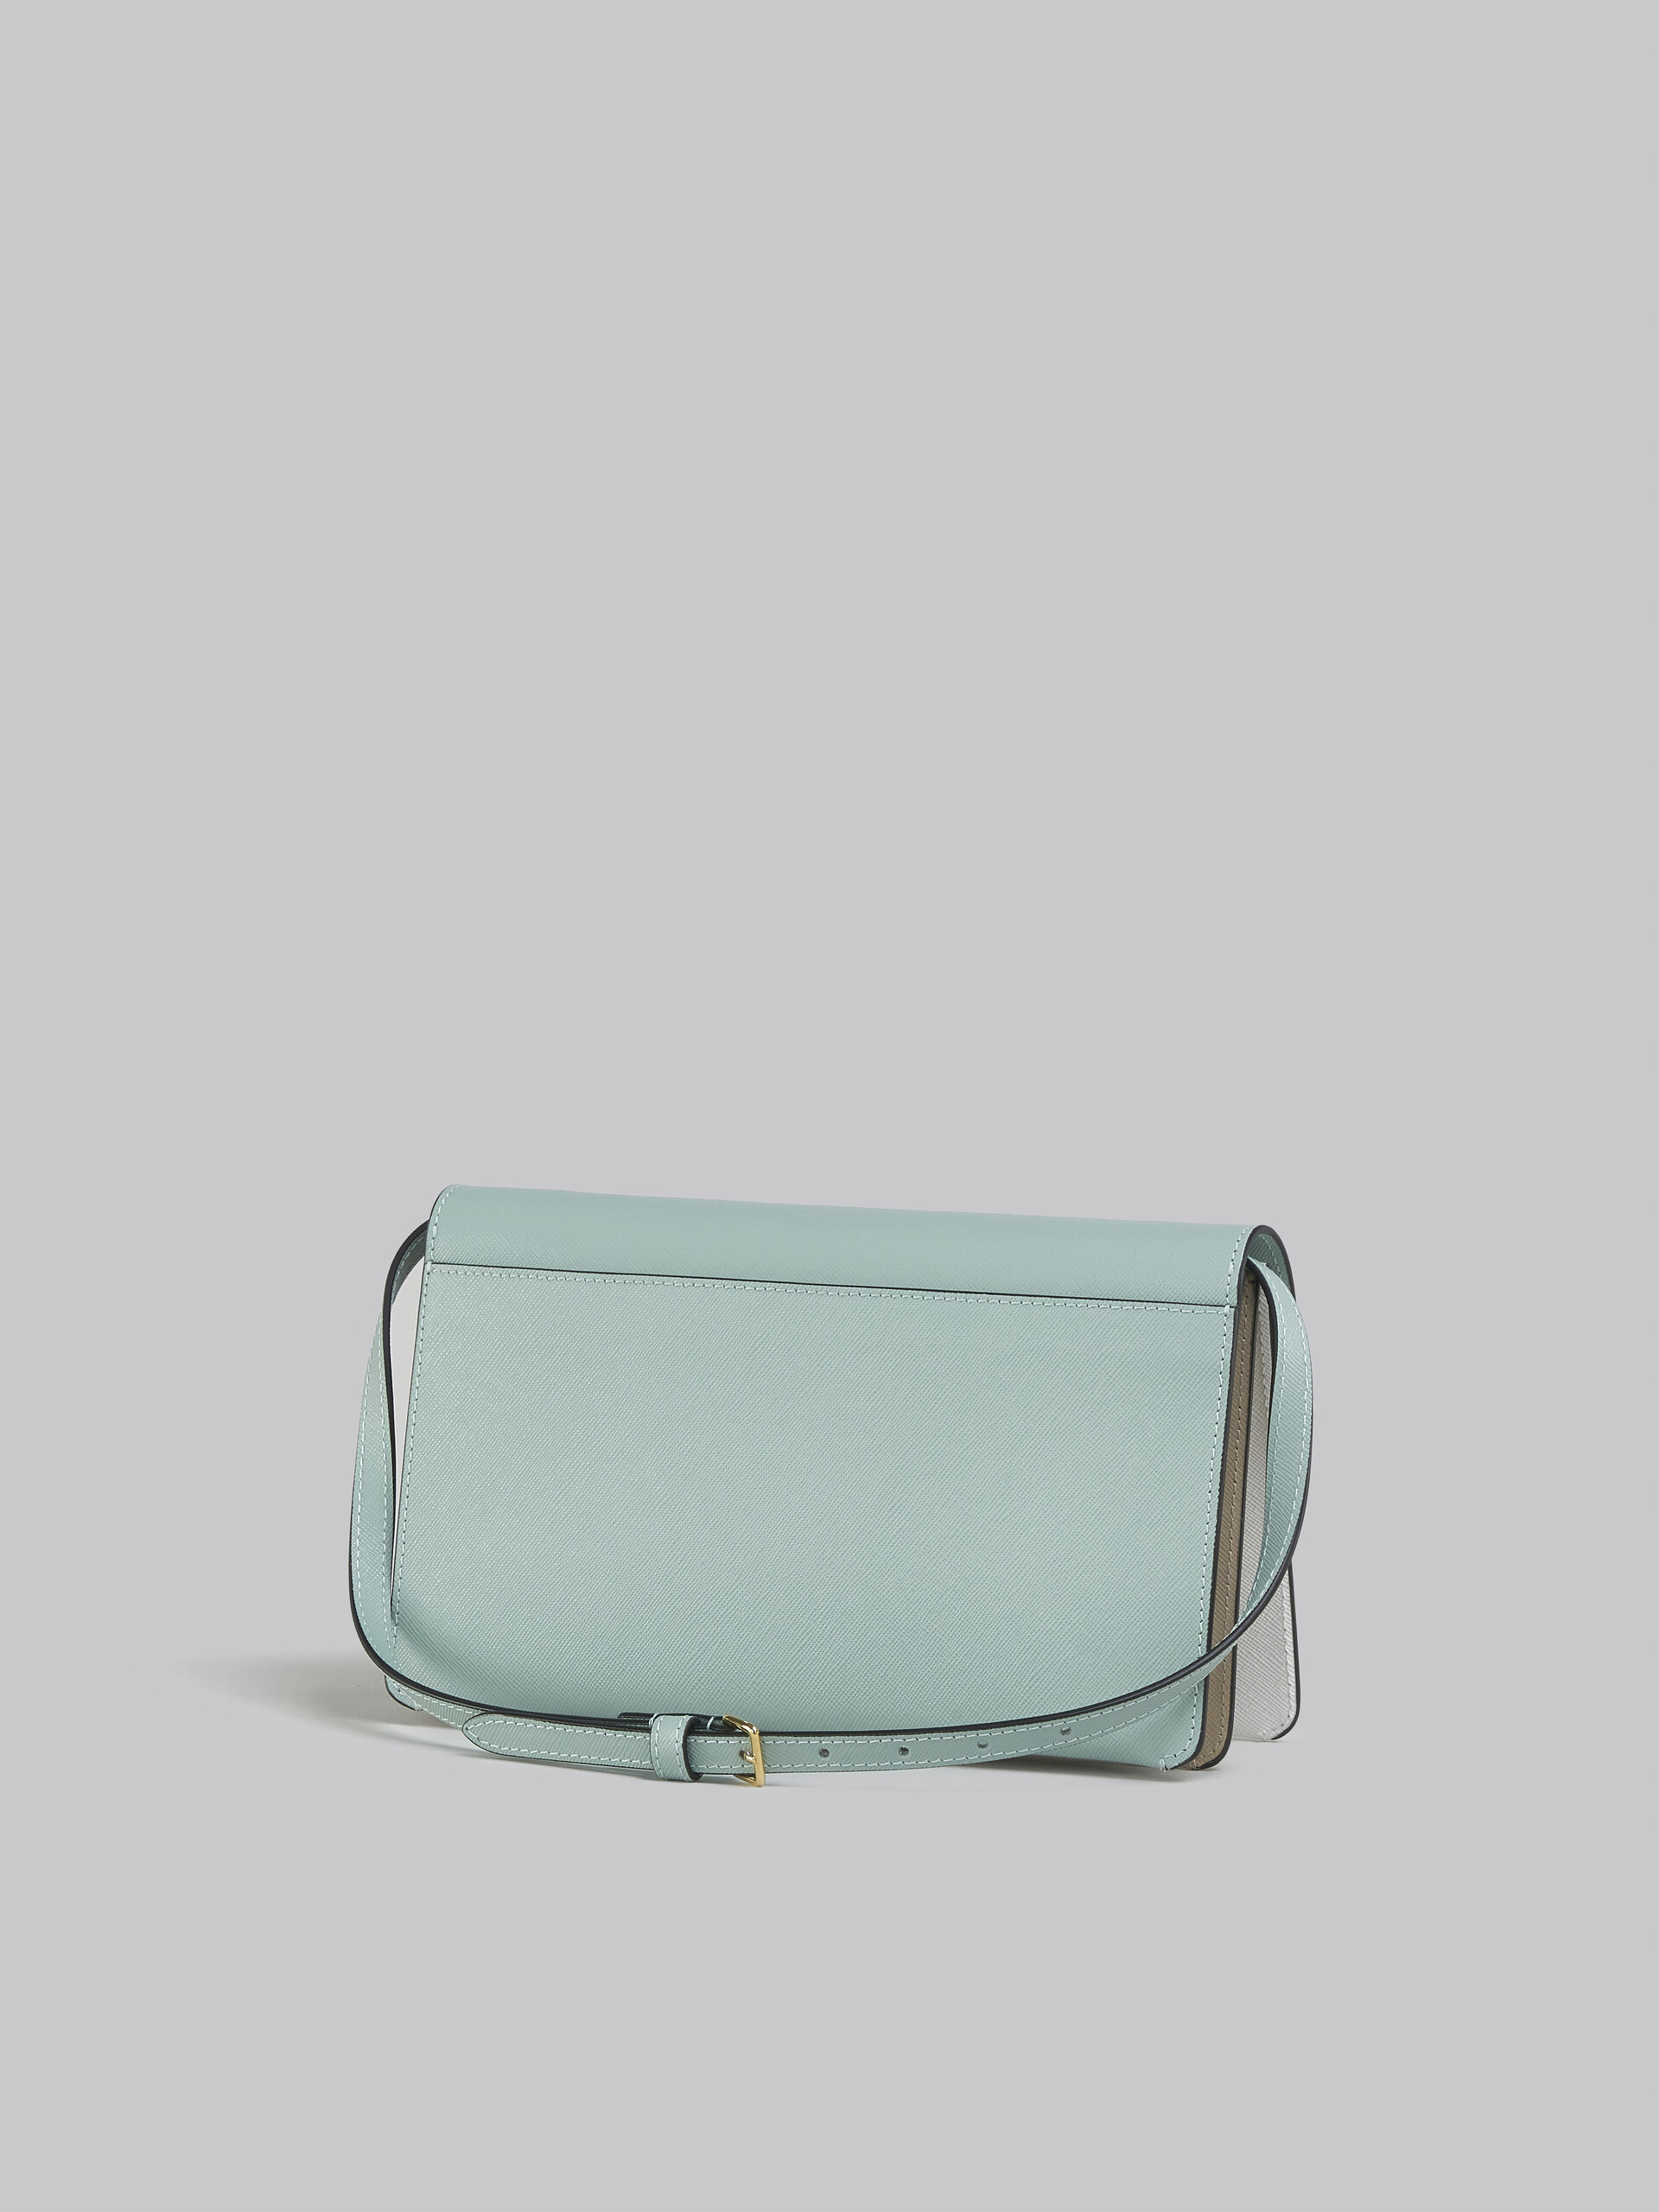 Trunk Clutch in light green white and brown saffiano leather - Pochette - Image 3